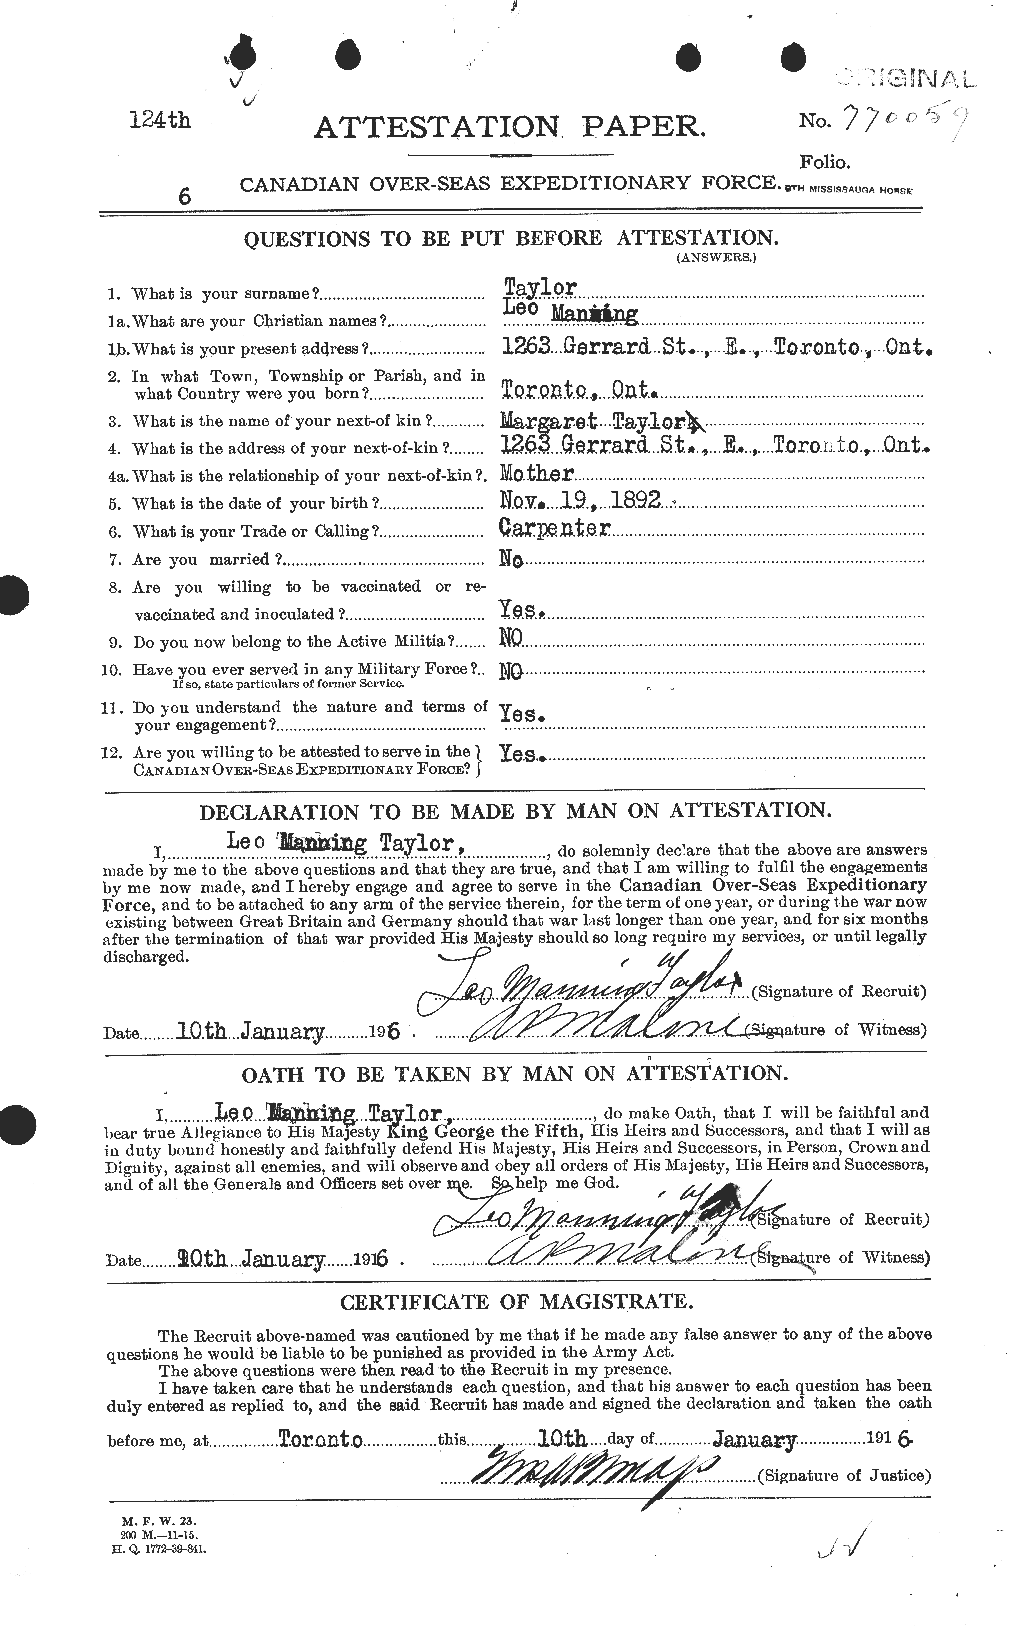 Personnel Records of the First World War - CEF 627620a